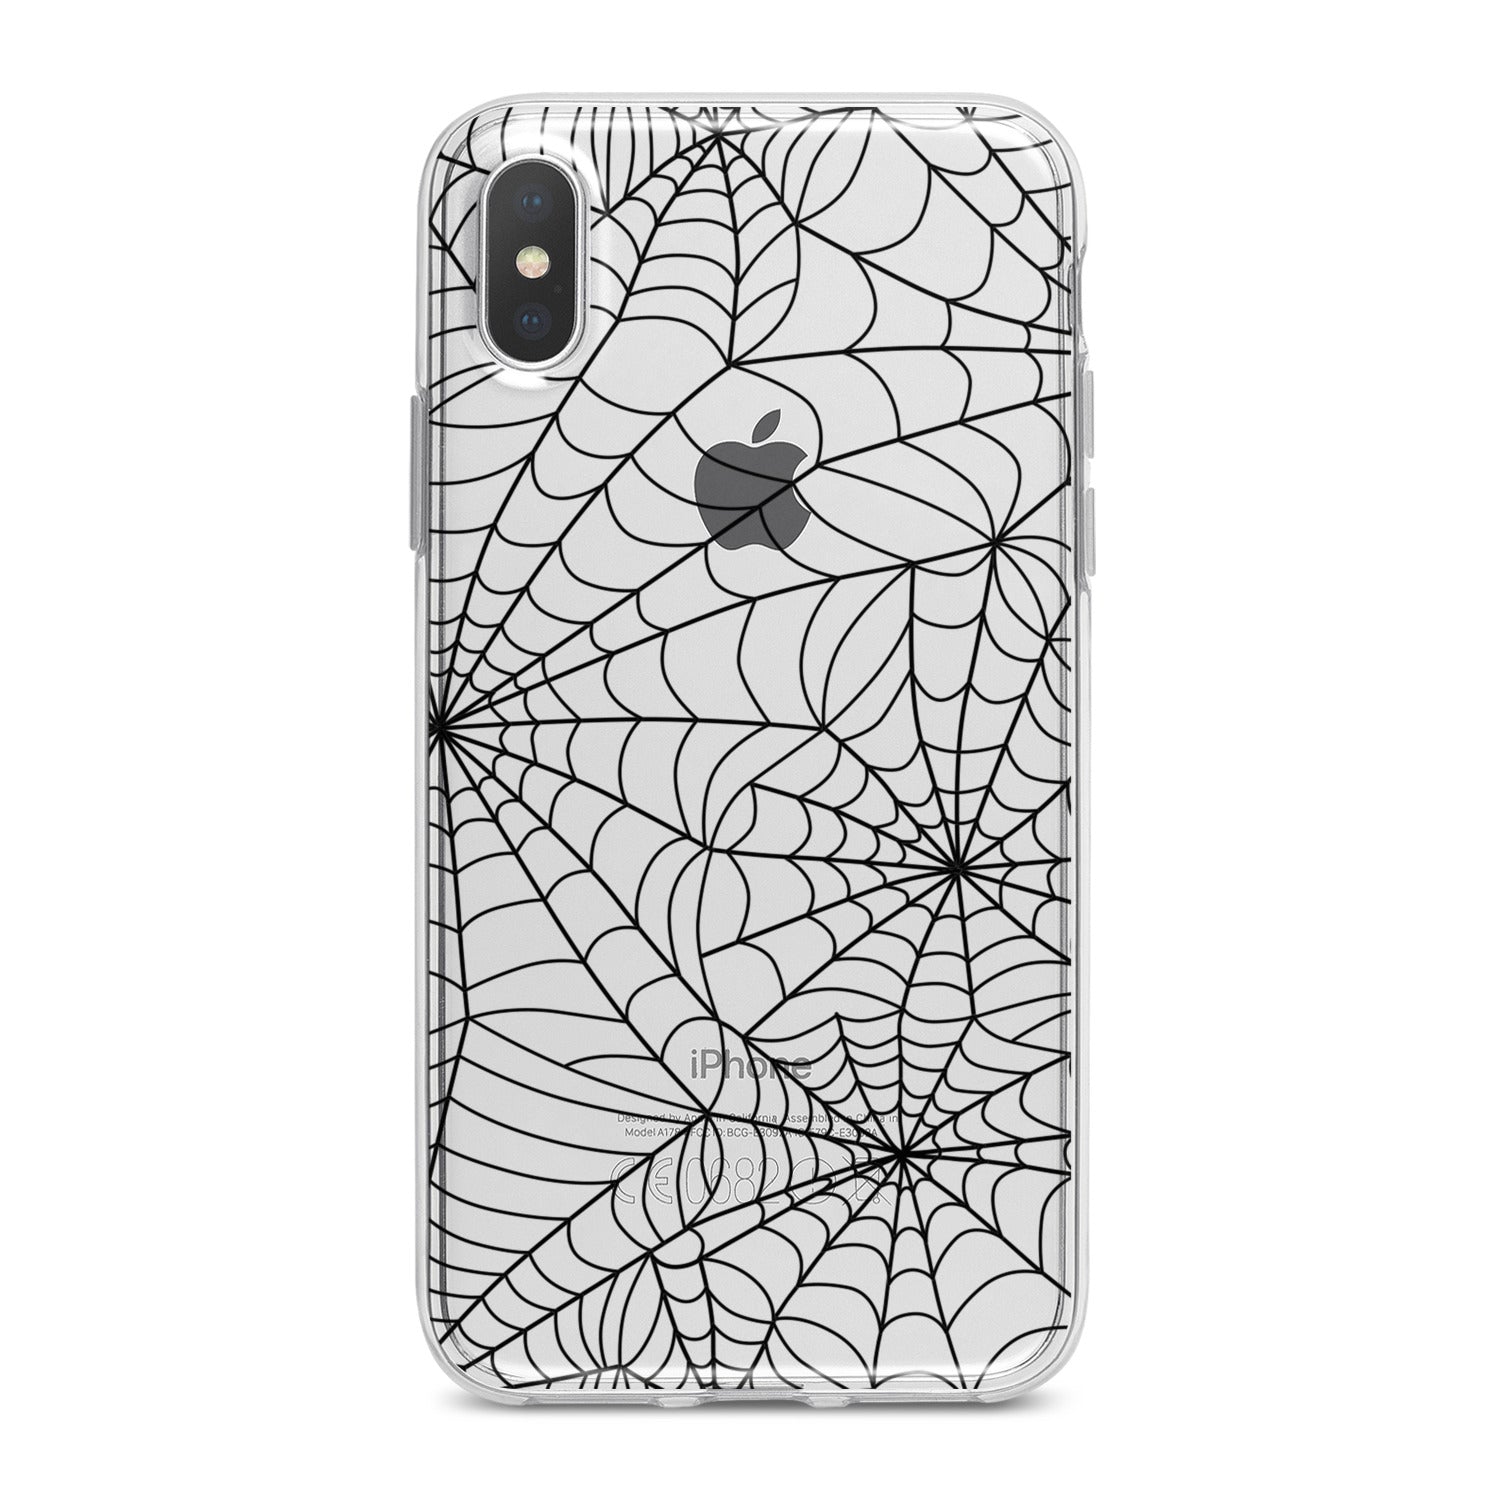 Lex Altern Black Spiderweb Pattern Phone Case for your iPhone & Android phone.